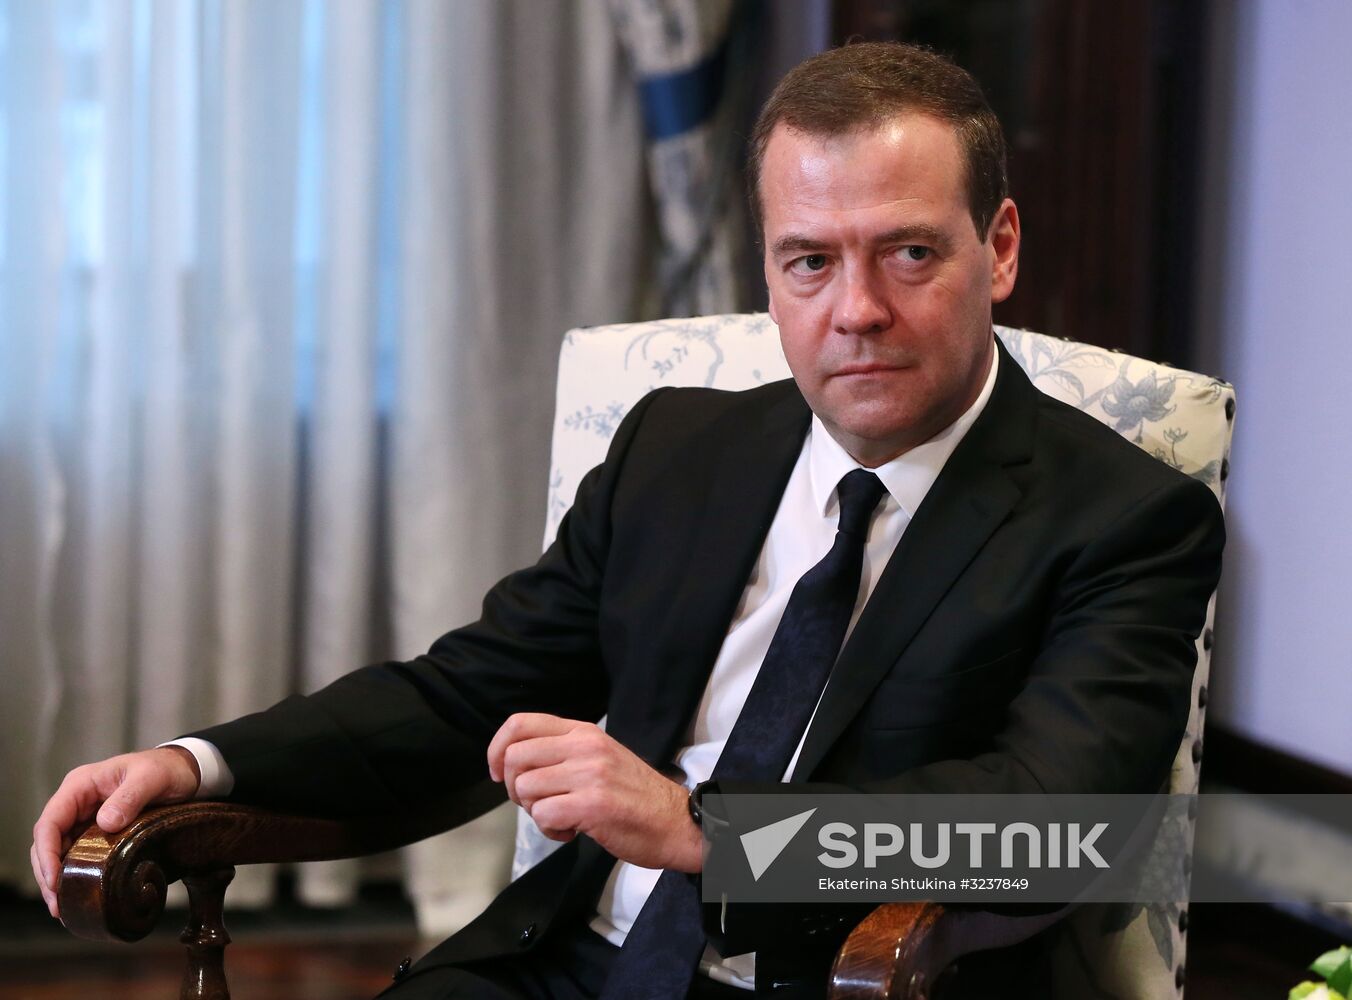 Prime Minister Dmitry Medvedev meets with the WHO Director-General